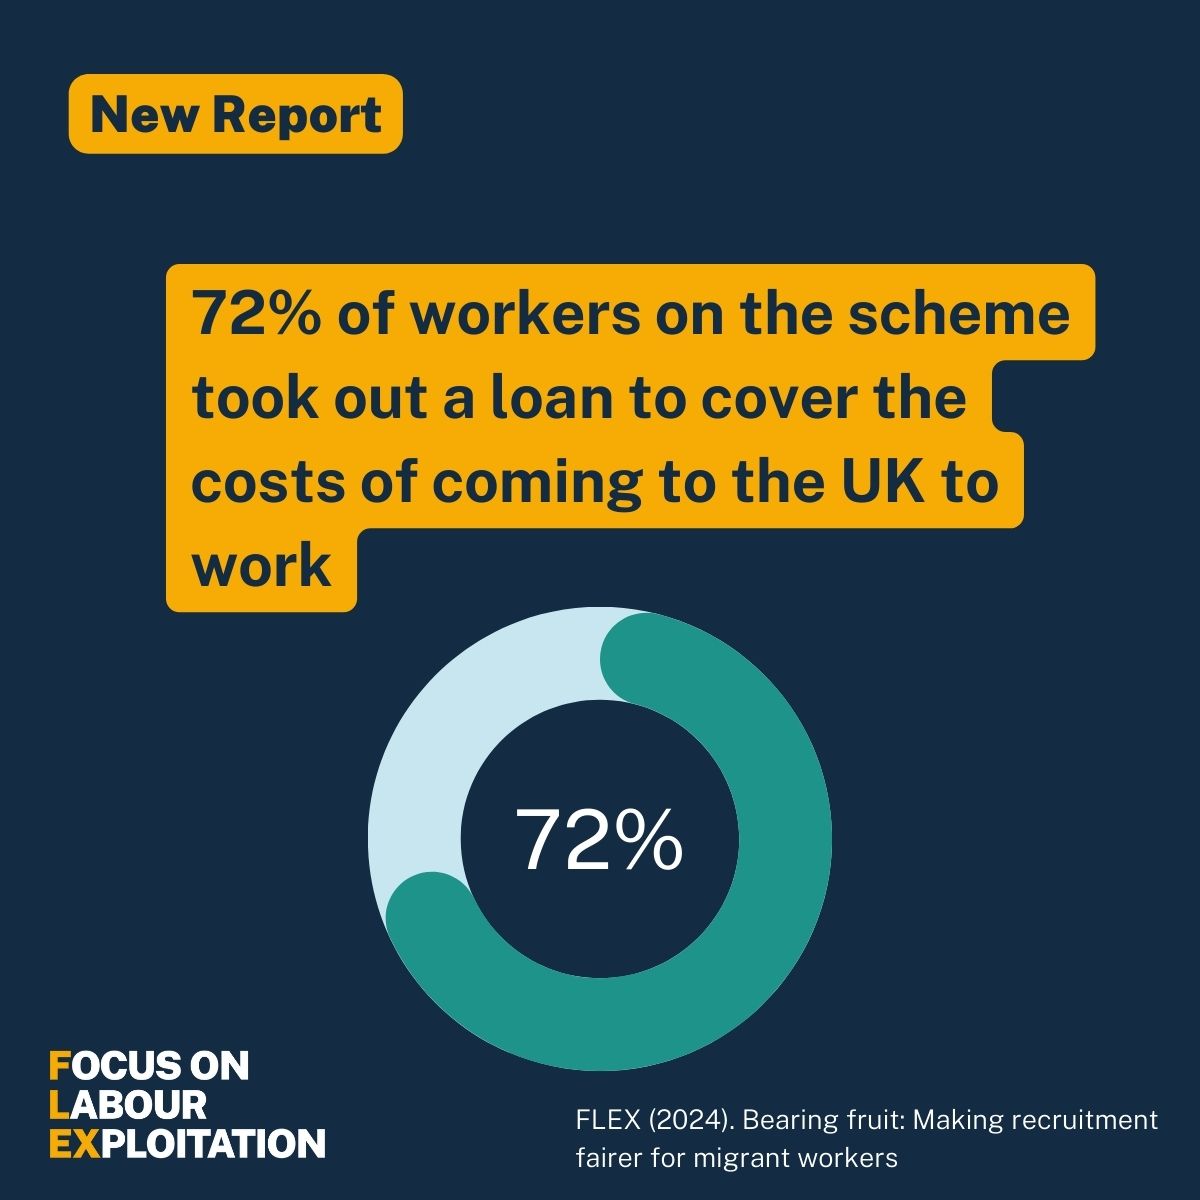 📢NEW REPORT Today we launch our latest #research on recruitment to the Seasonal Worker Scheme in UK #agriculture. Interviews with 400+ #workers found many face debt and misinformation❌ 🌱The report: bit.ly/3TKoDSp 📰As reported by @FT: bit.ly/3U20k2v